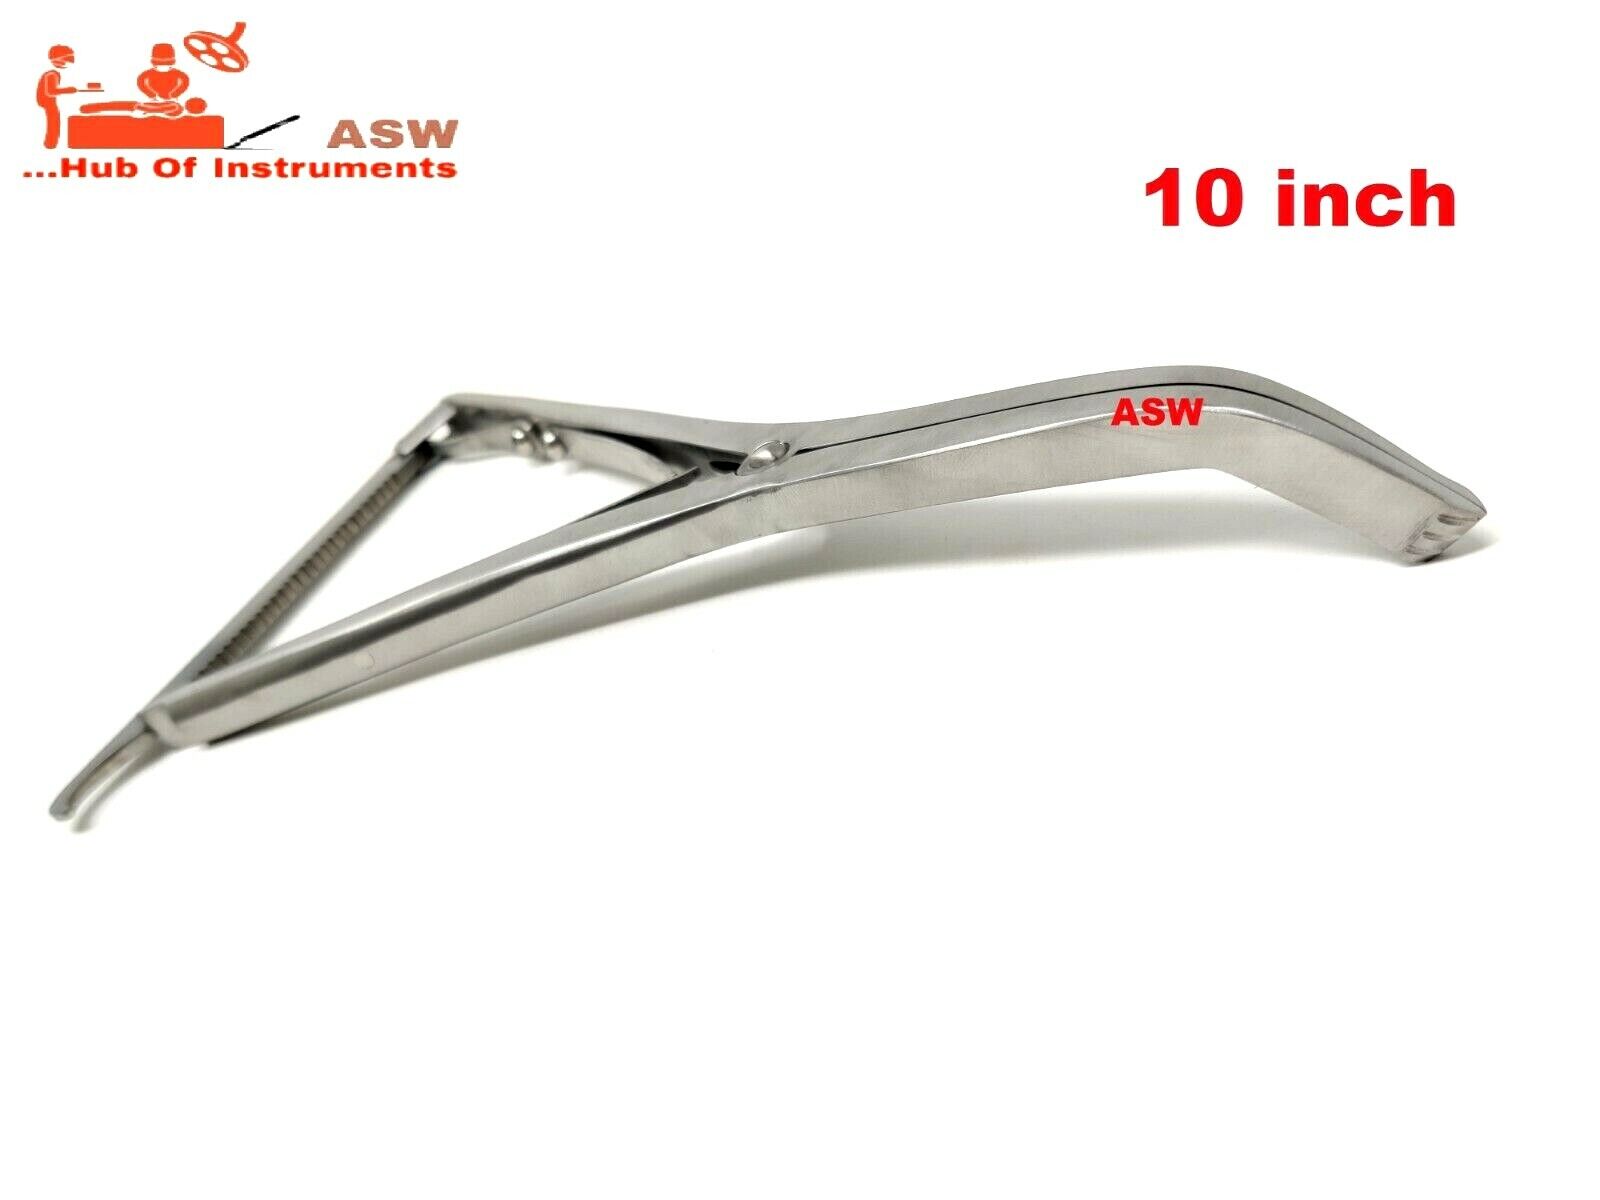 Inge Lamina Spreader 10 inch With Teeth Serrated Orthopedic Surgical Instrument